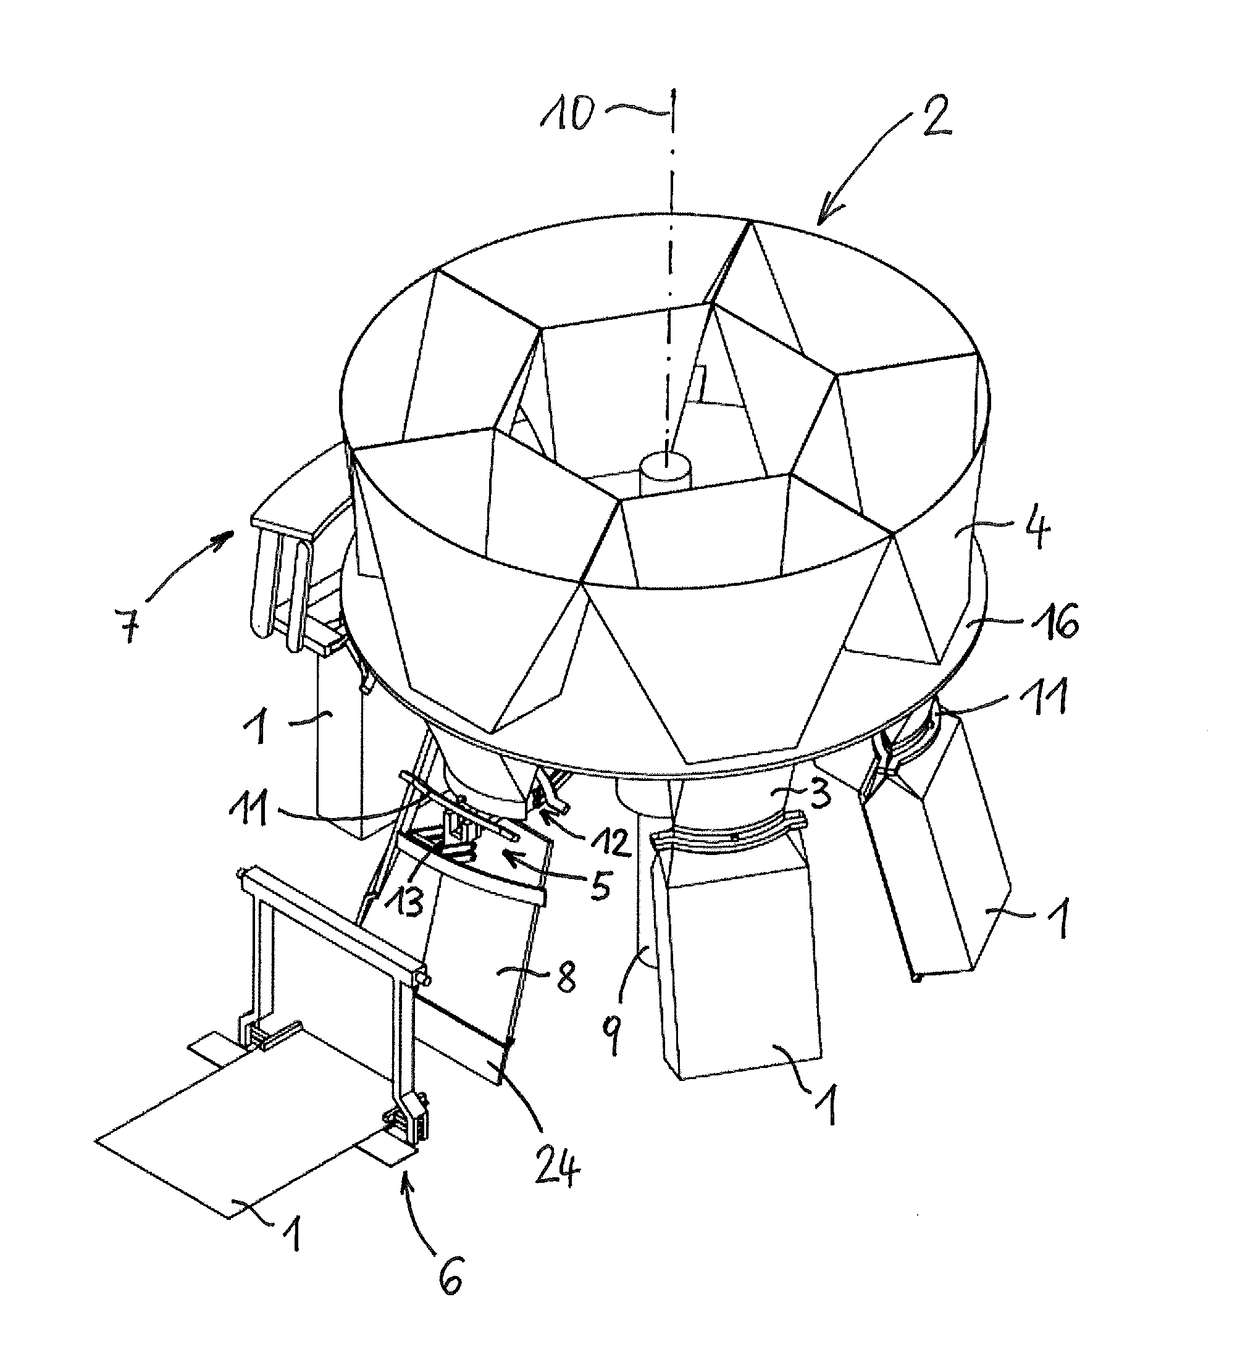 Device and method for transporting bags